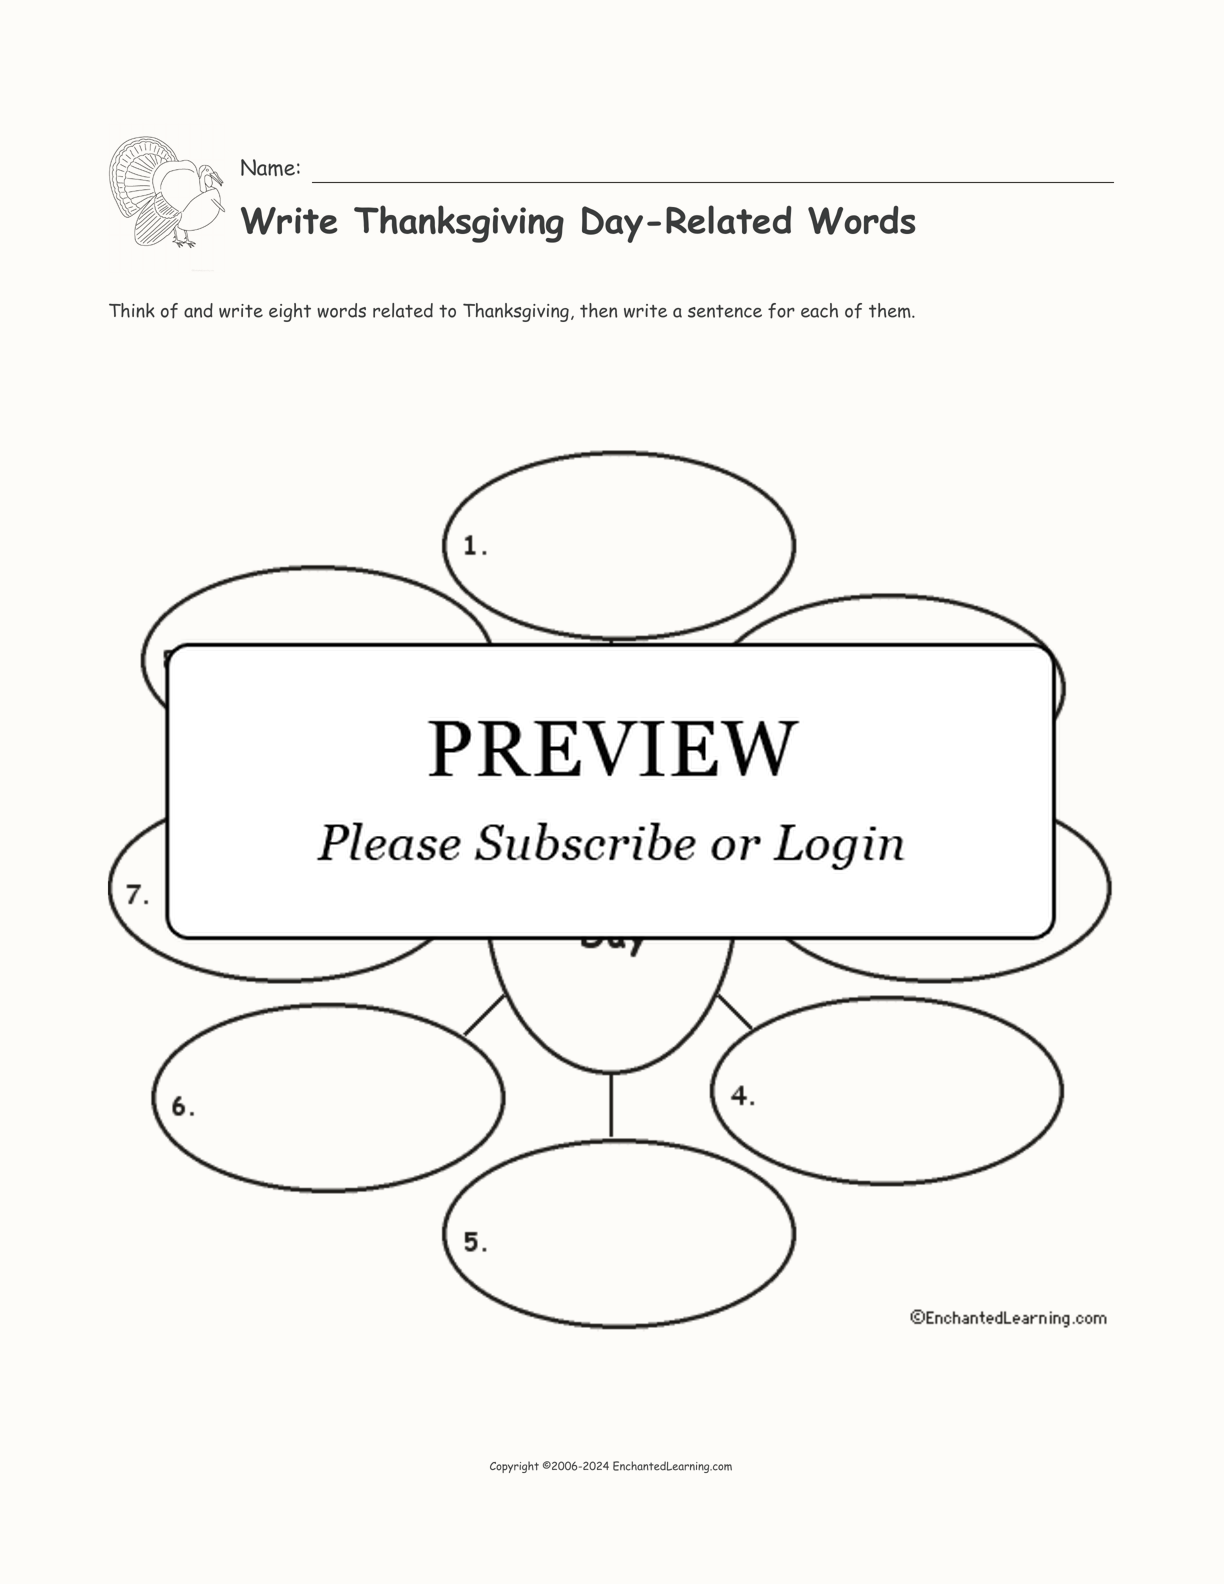 Write Thanksgiving Day-Related Words interactive printout page 1